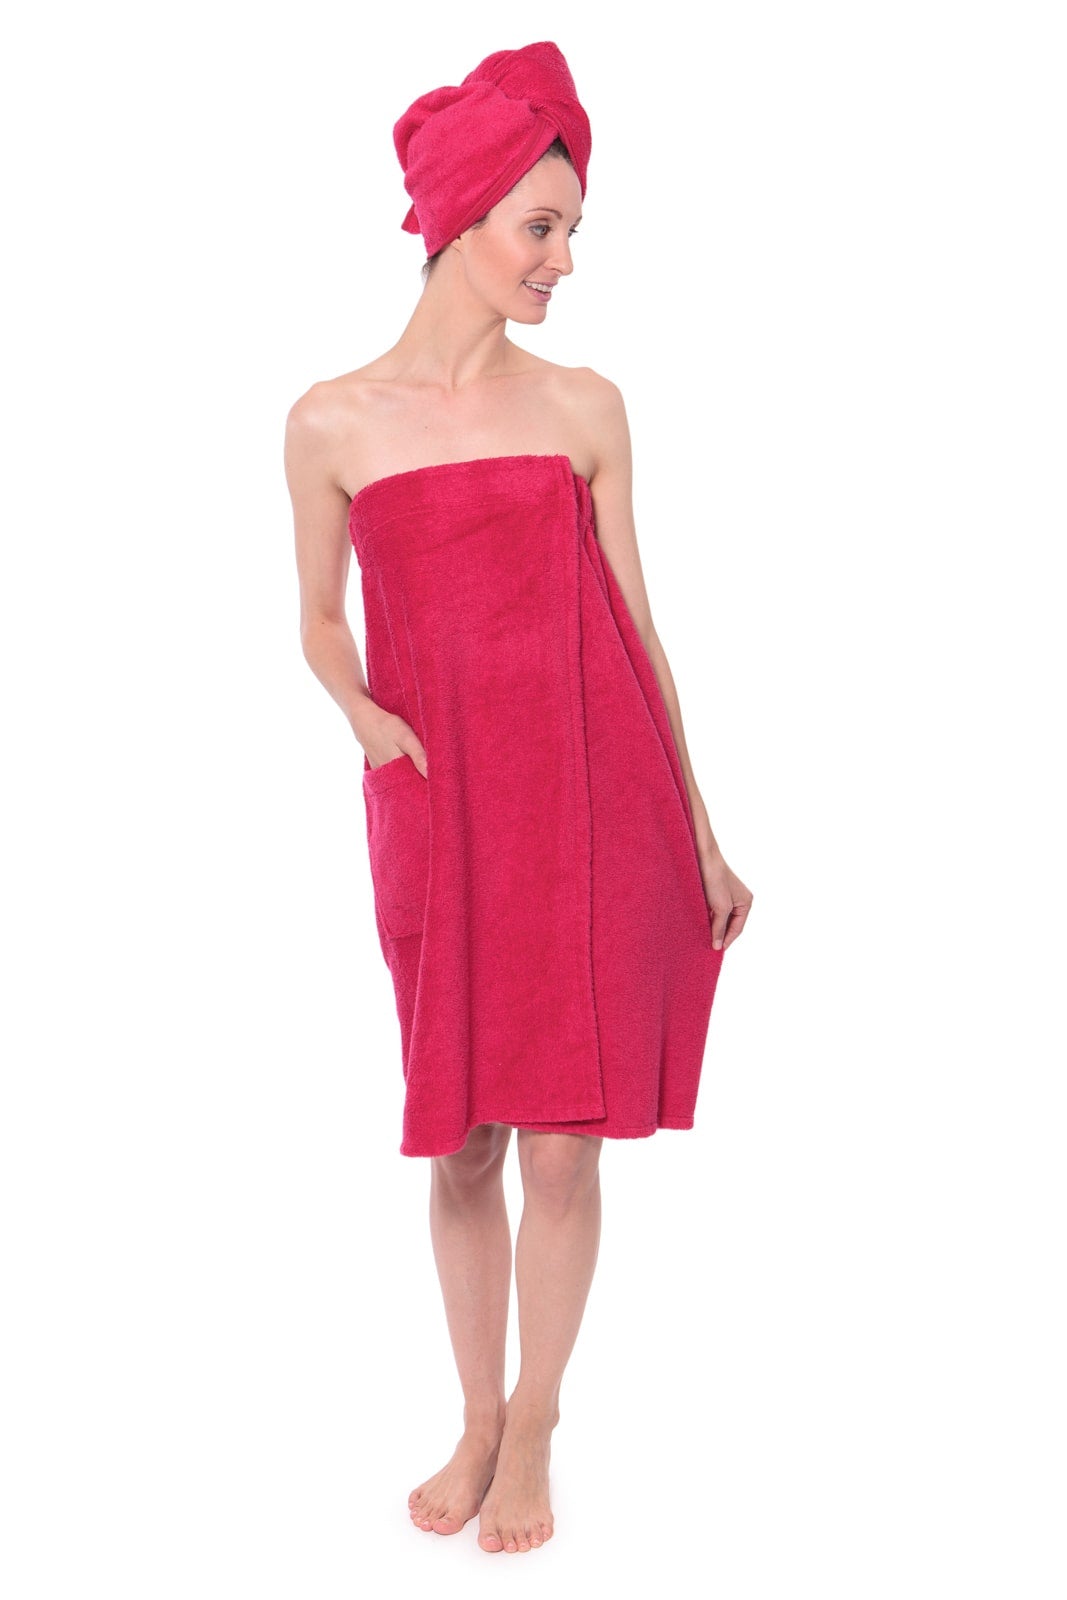 Texere Women&#39;s 2pc Terry Cloth Body and Hair Wrap Womens&gt;Spa&gt;Set Fishers Finery Rose Red S/M 